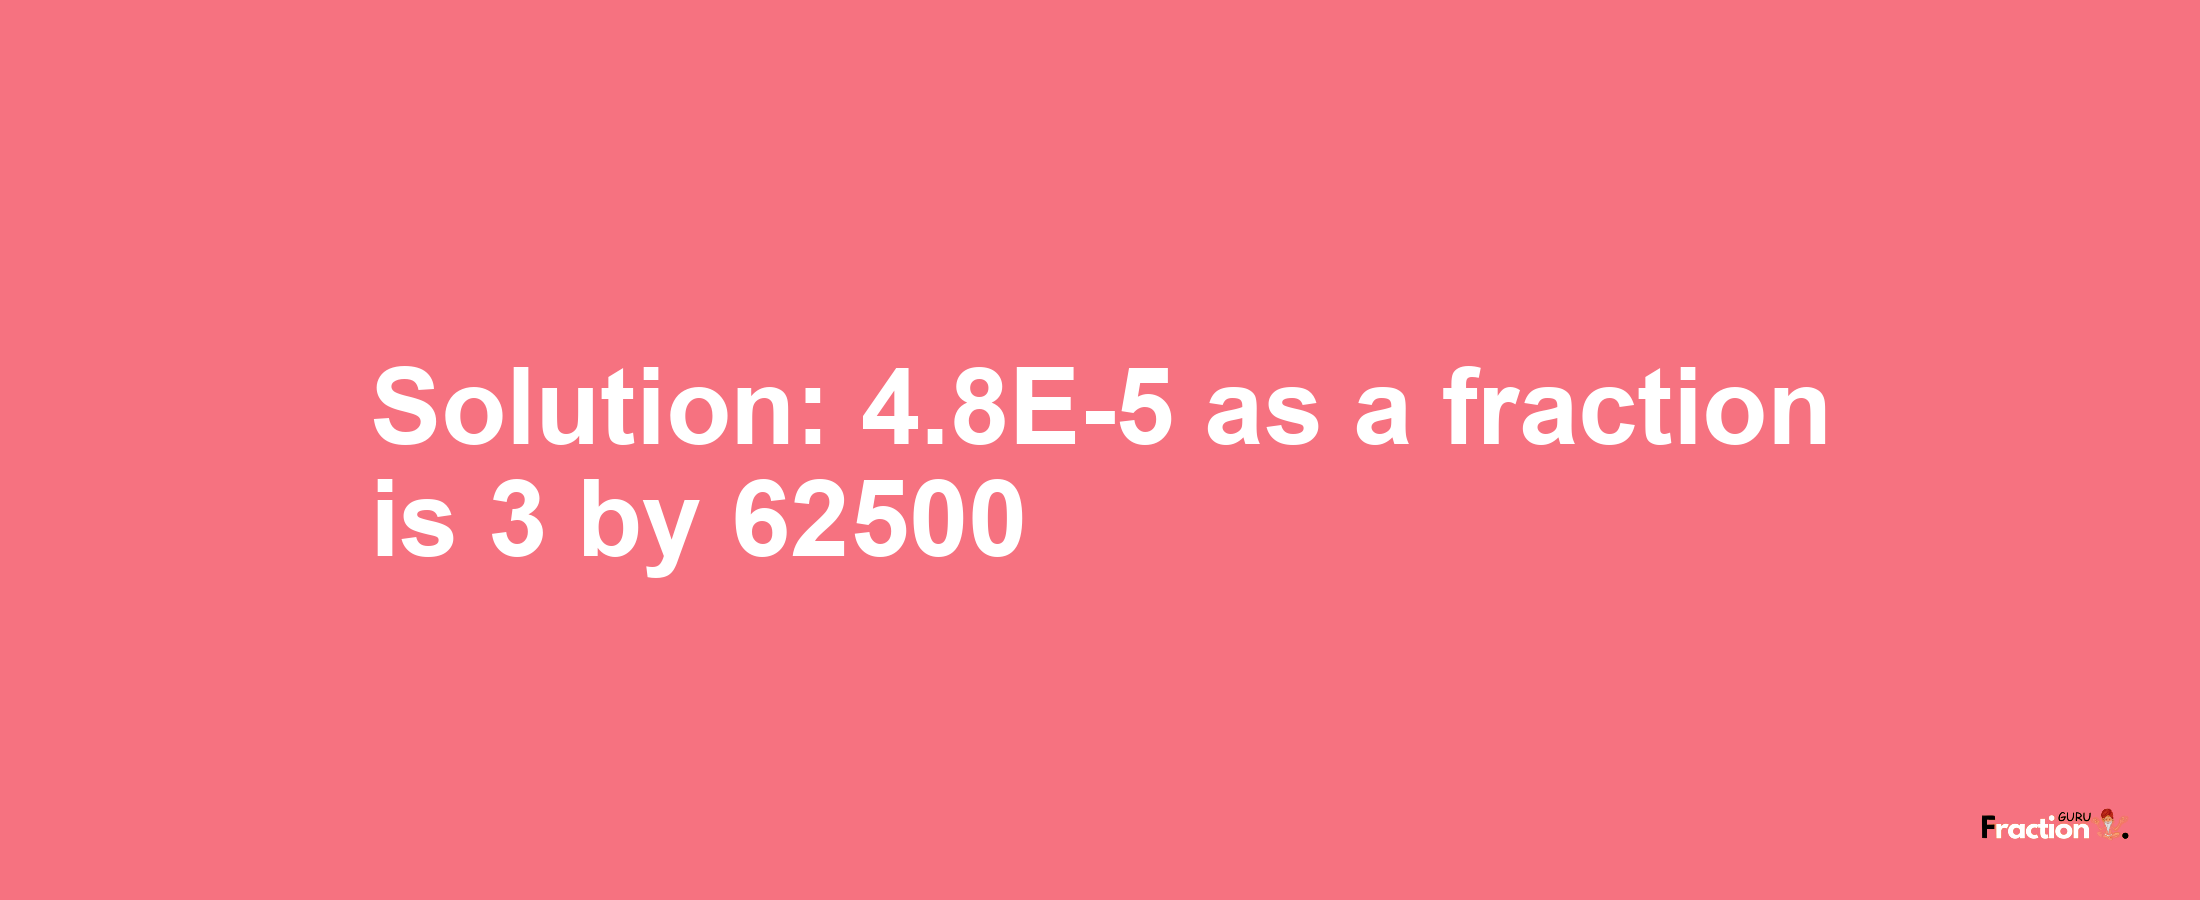 Solution:4.8E-5 as a fraction is 3/62500